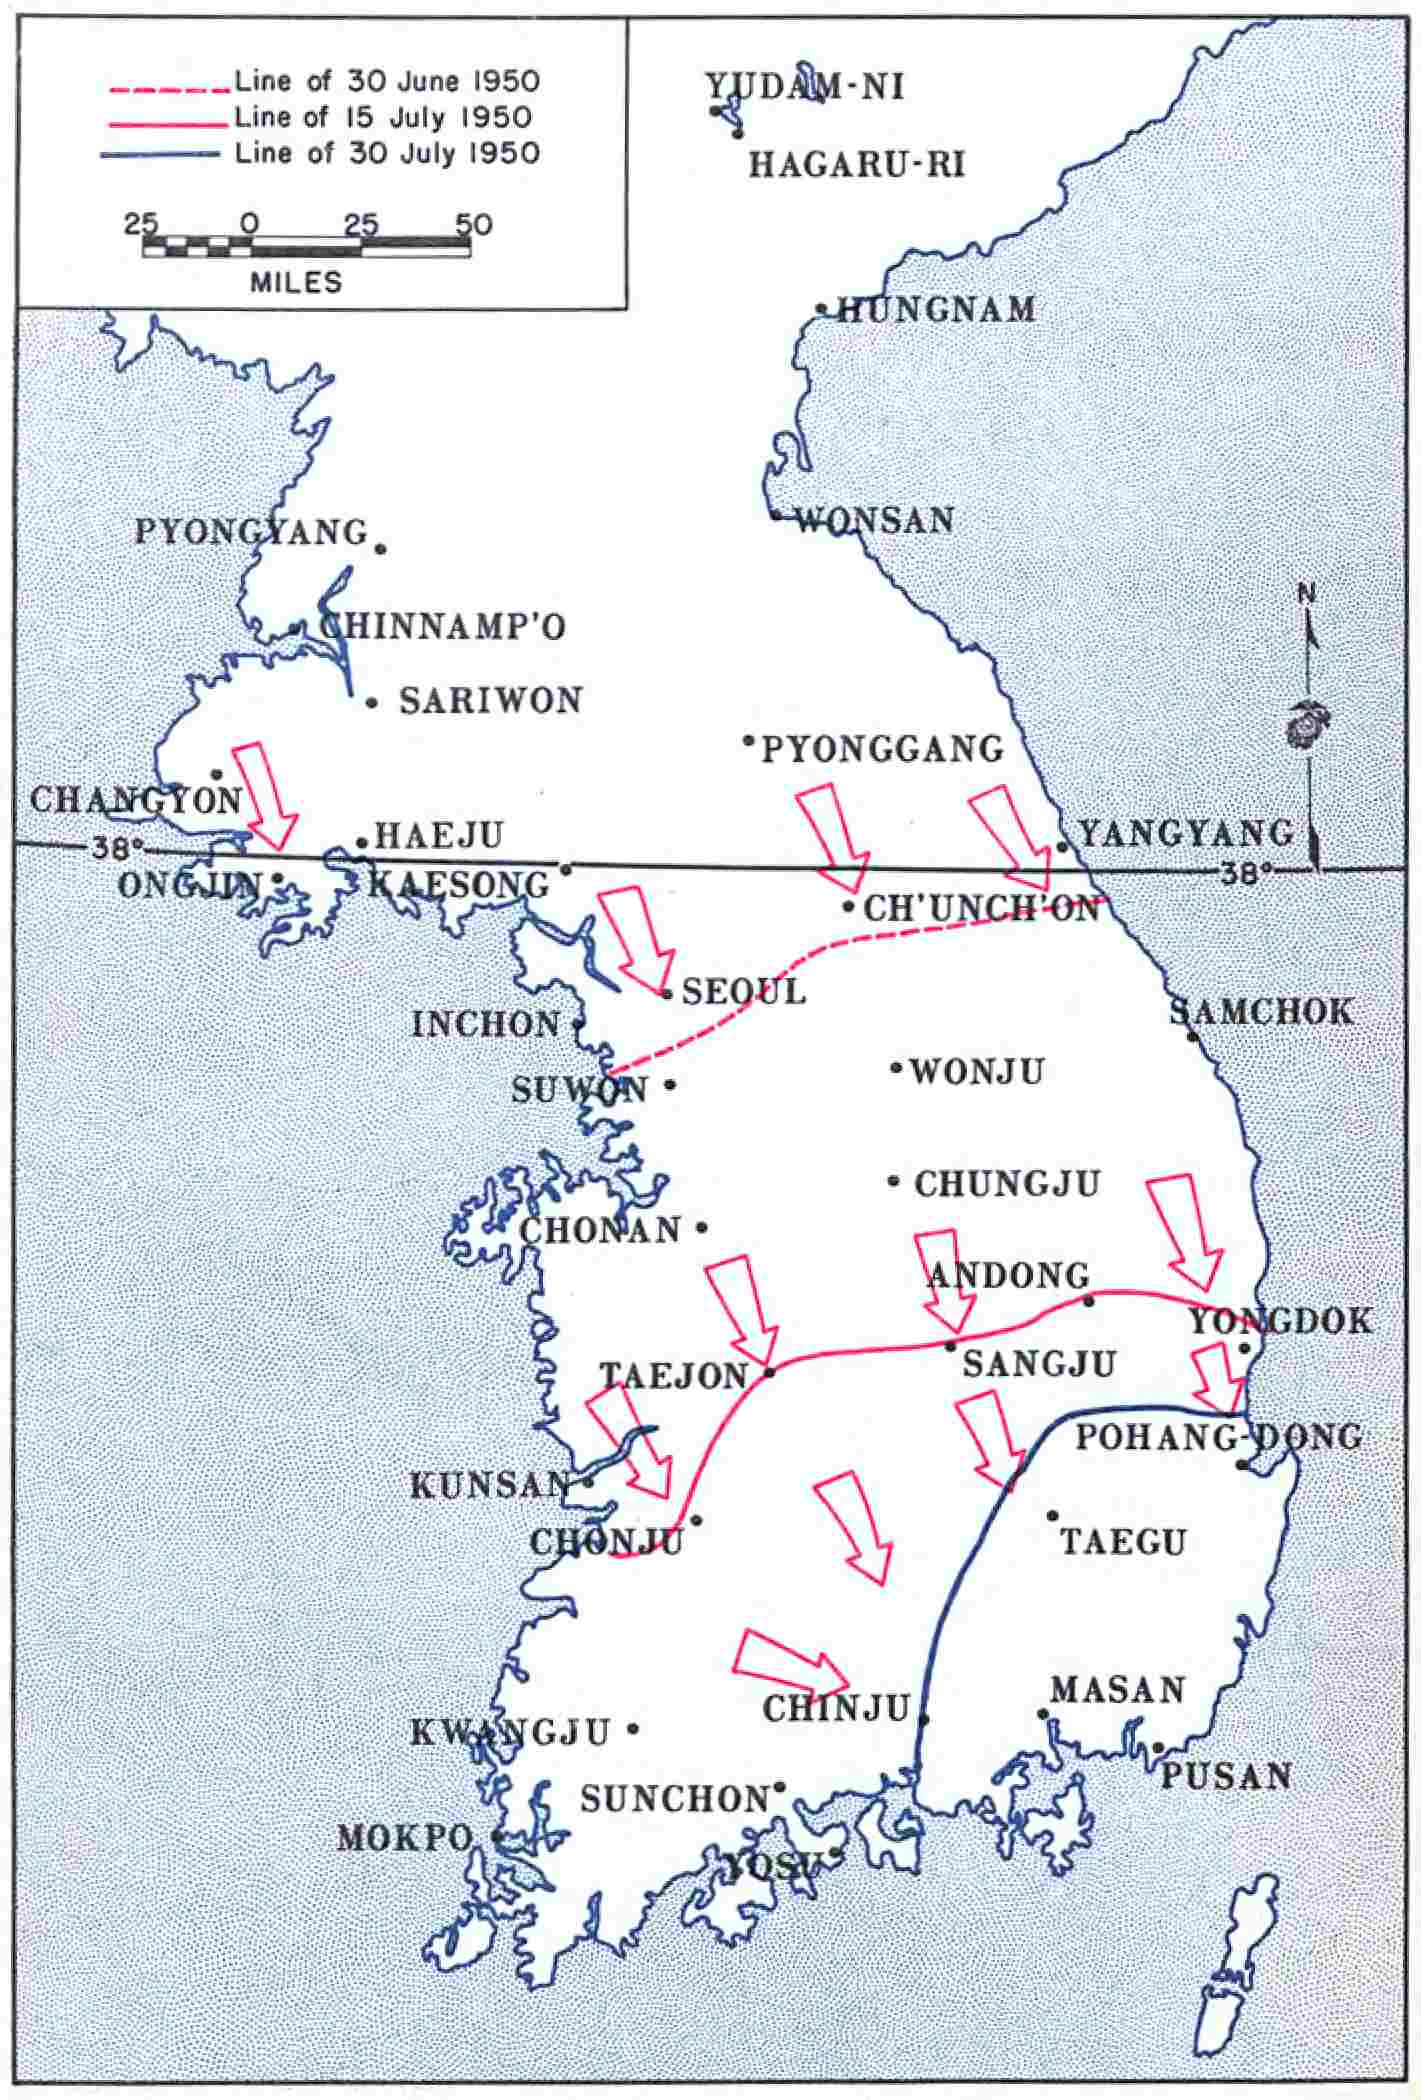 (Map of Korea, indicating battle fronts in July, 1950.)